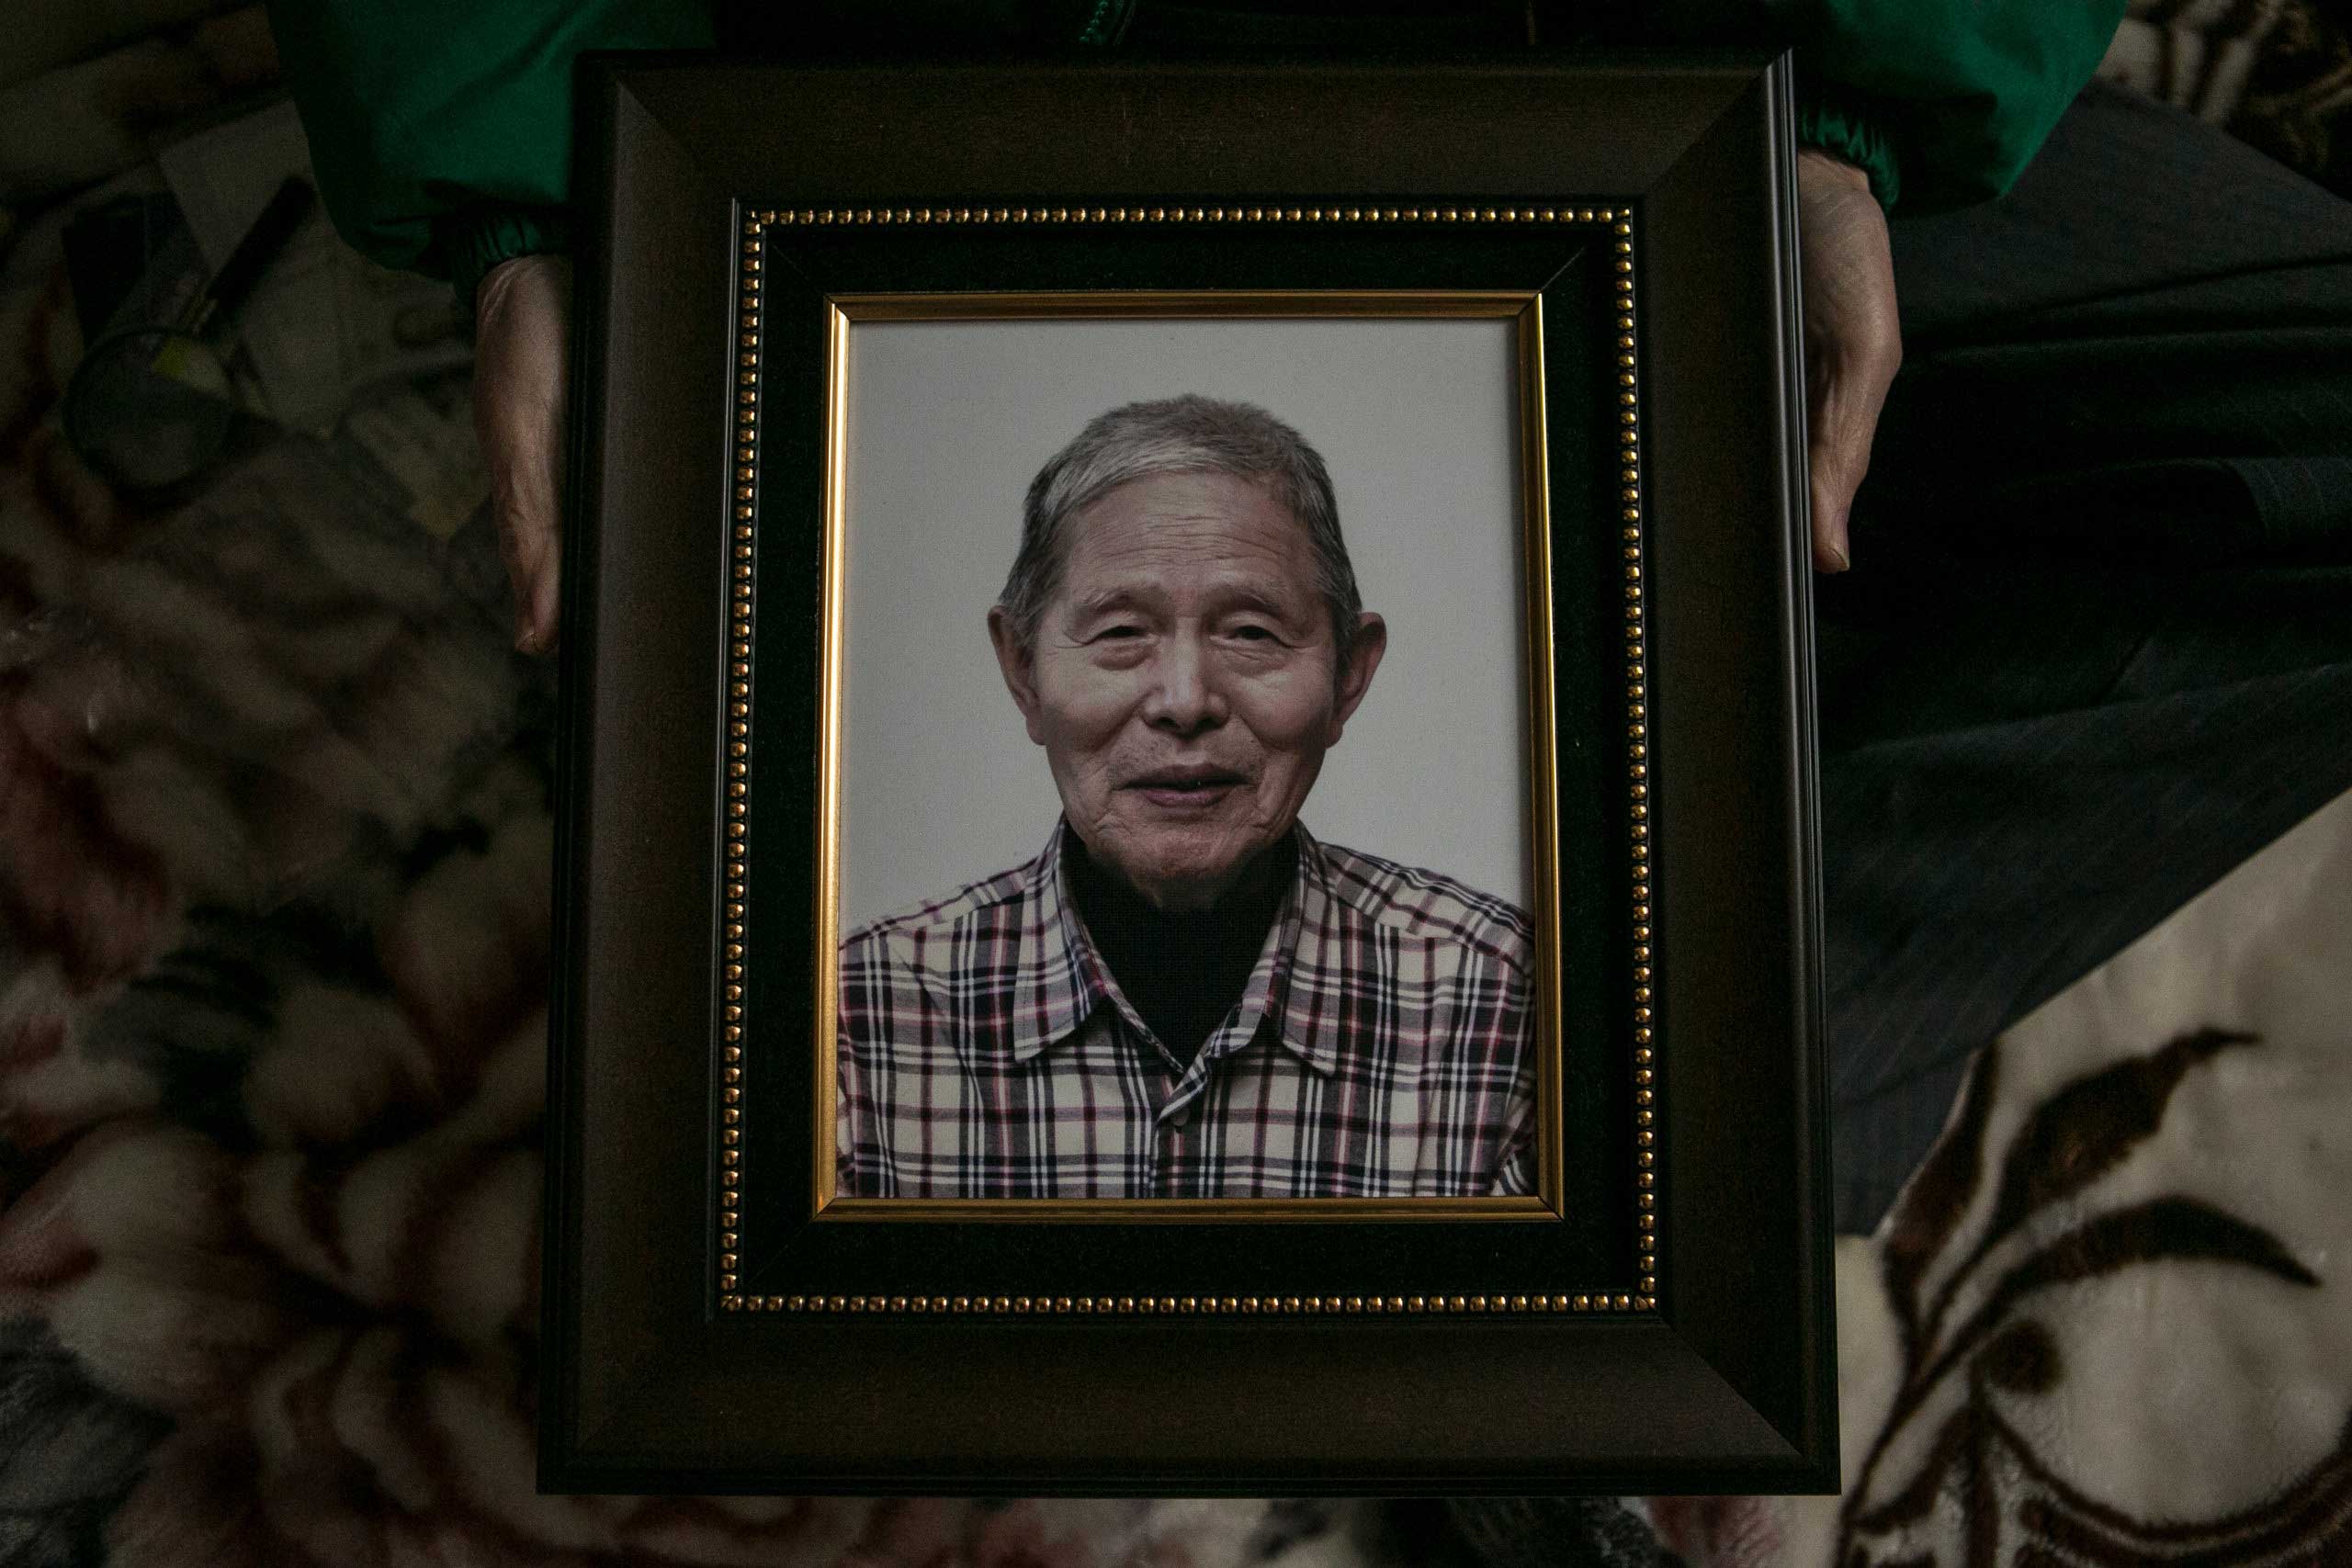 Ham Hak-joon shows a photo of him, which will be used in his funeral, in his one-room home on top of the hill in Jongro District, Seoul, Dec. 27, 2014. (Jean Chung for TIME)